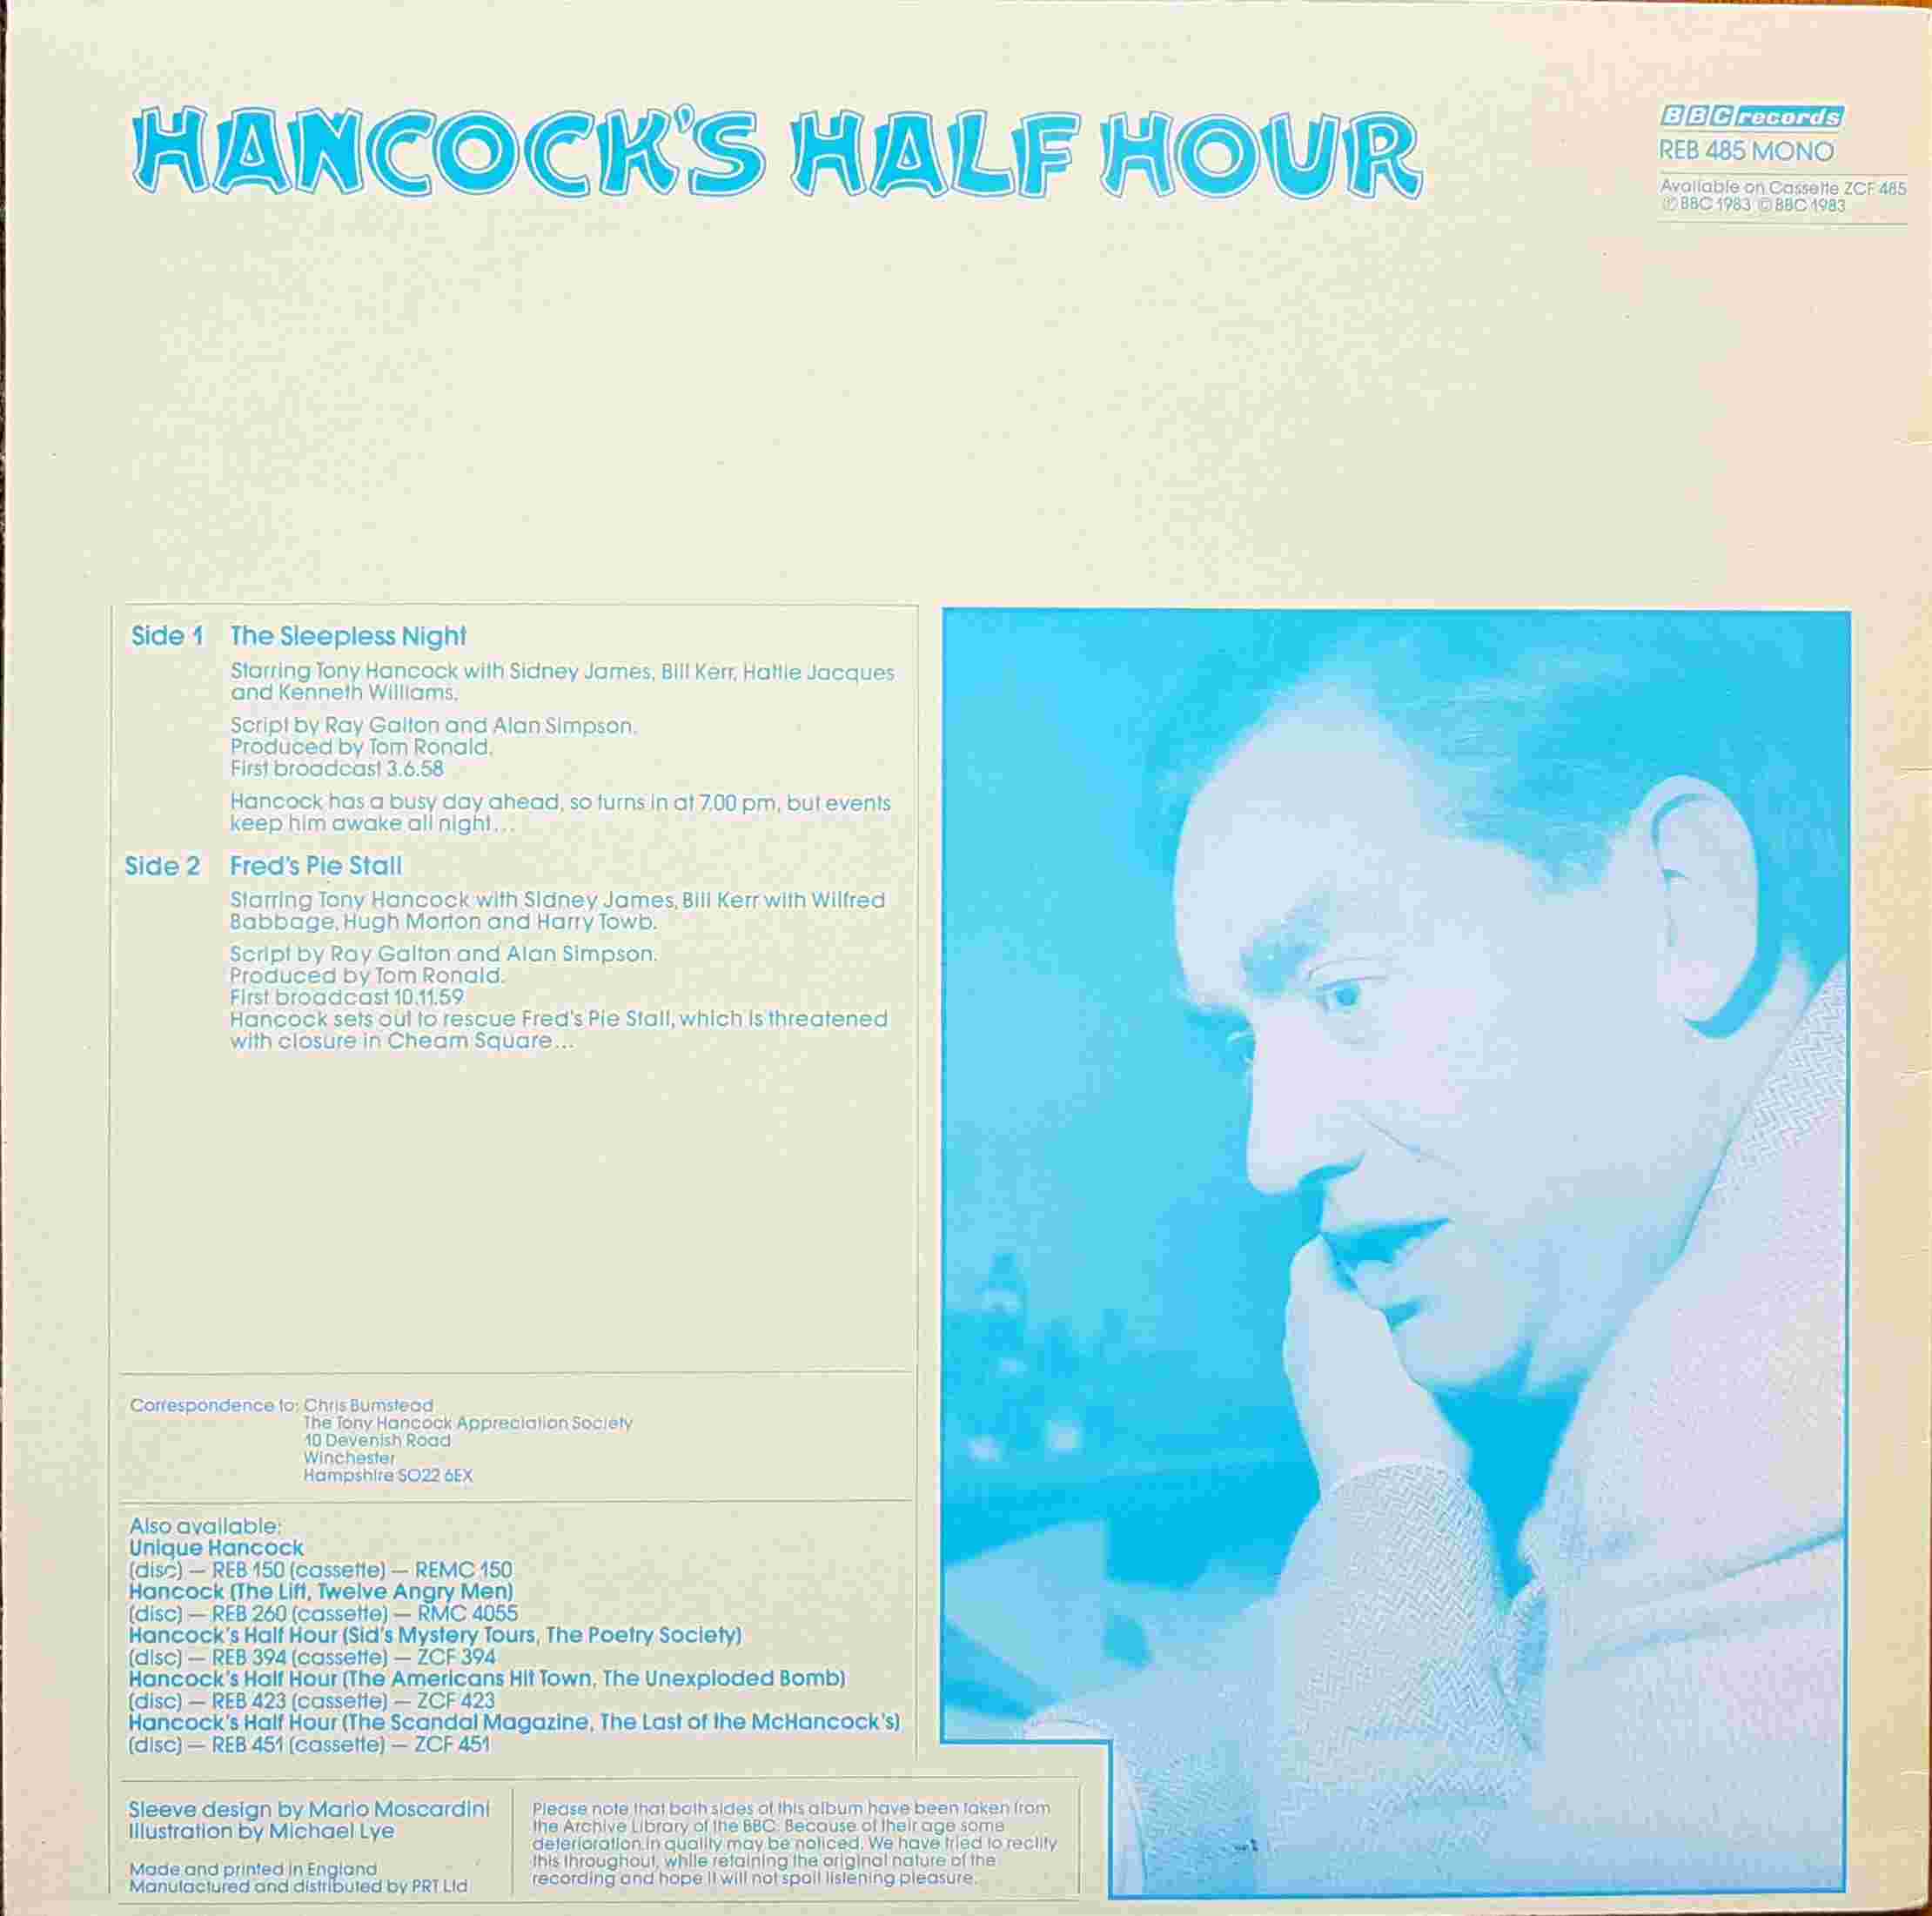 Picture of REB 485 Hancock's half hour - Volume 4 by artist Tony Hancock from the BBC records and Tapes library